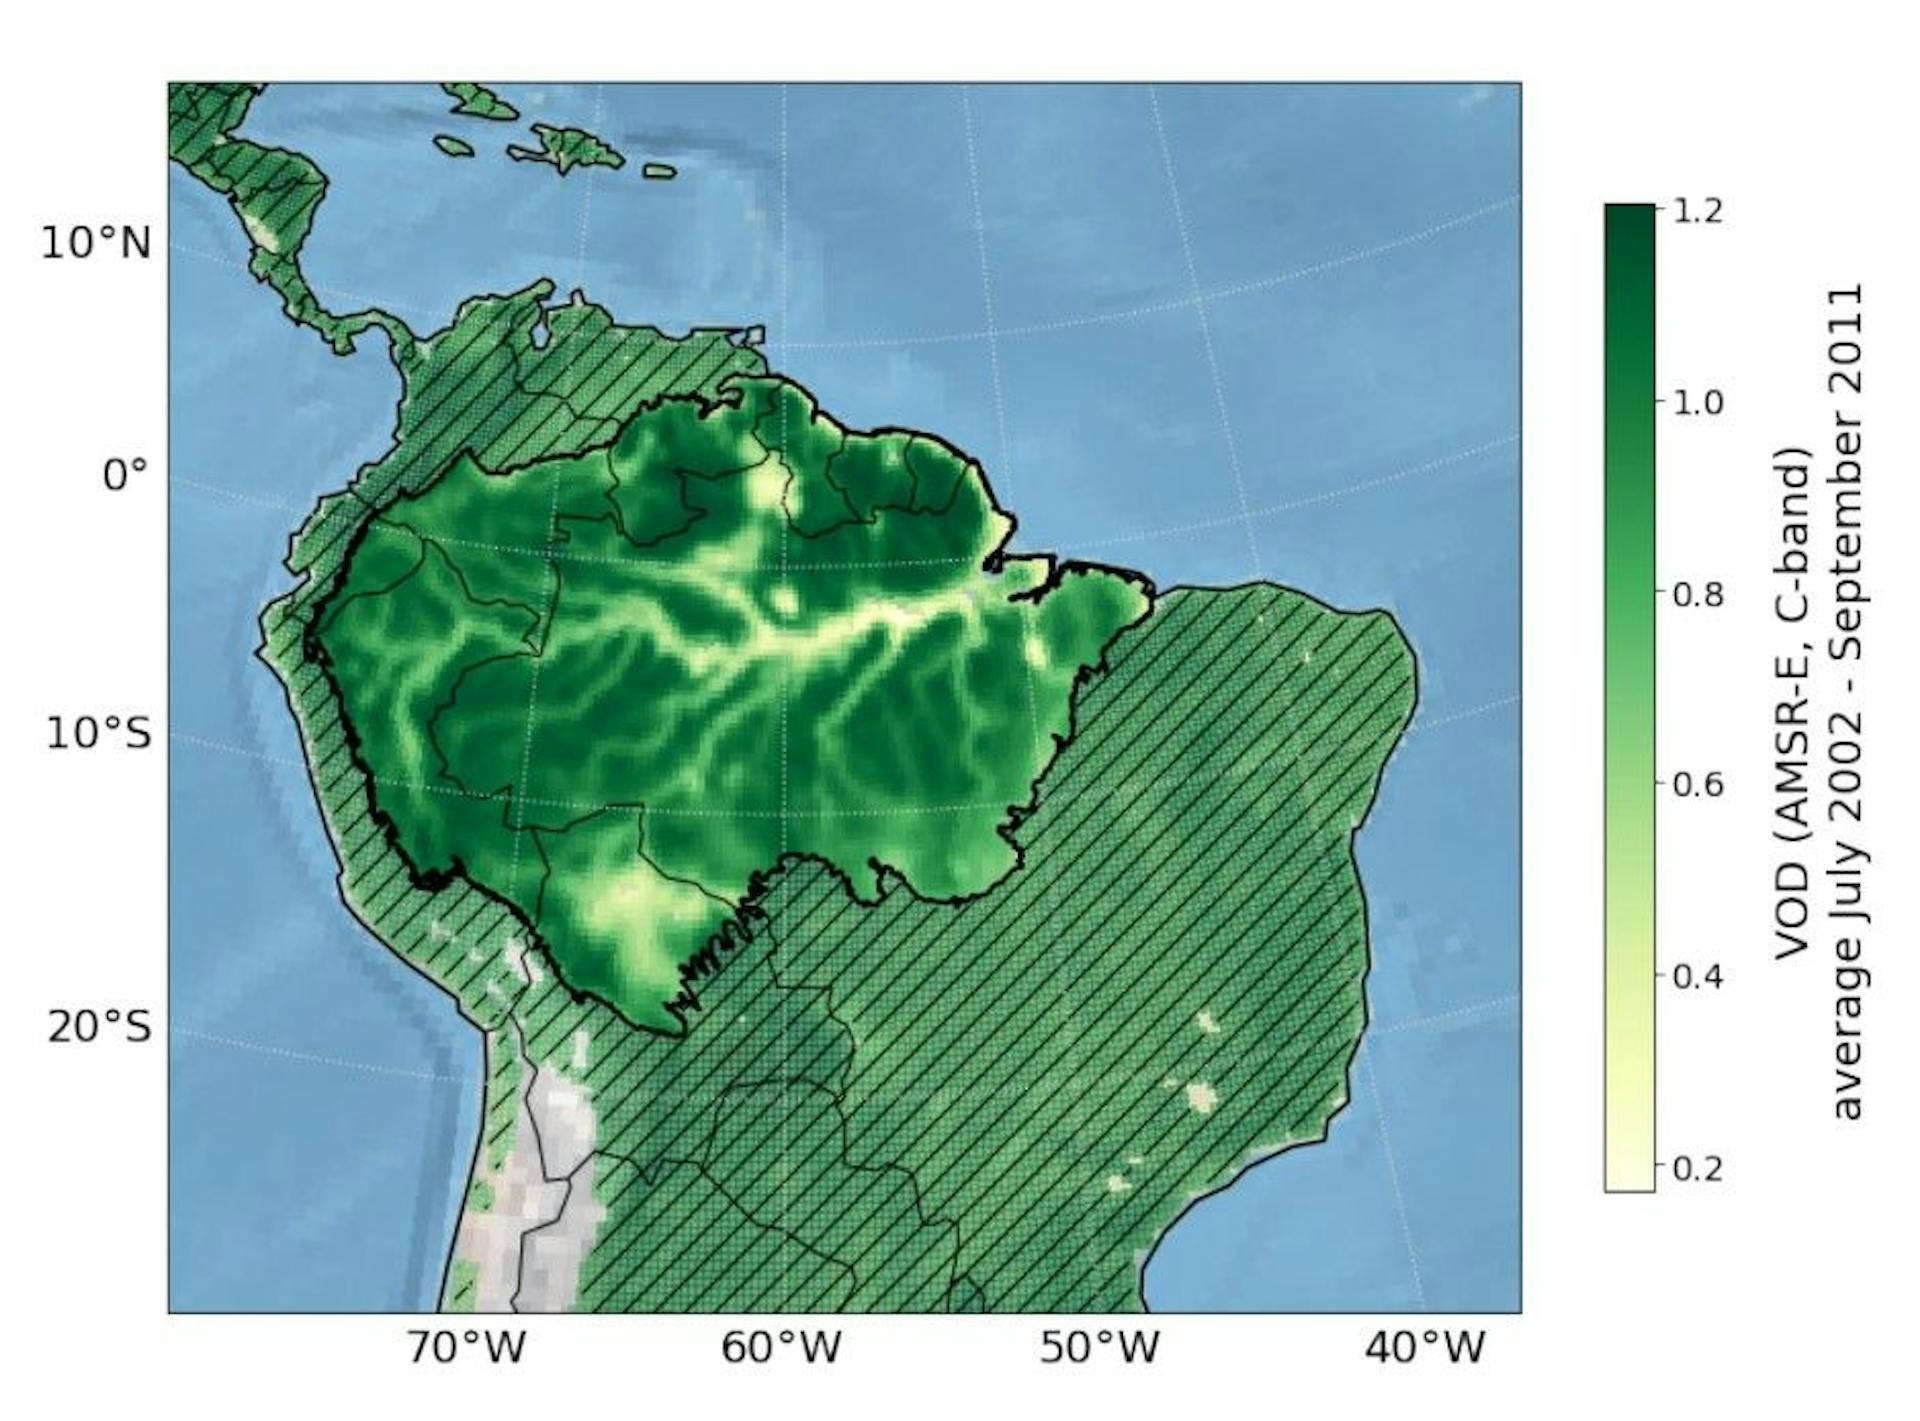 Figure 1: Average Vegetation Optical Depth in the Amazon basin measured by the C-band of the AMSR-E satellite sensor. Daily data is aggregated to a monthly resolution by taking the mean over complete months, hence the time period from July 2002 to September 2011 is considered in the case of AMSR-E. The outline of the Amazon basin can be found at